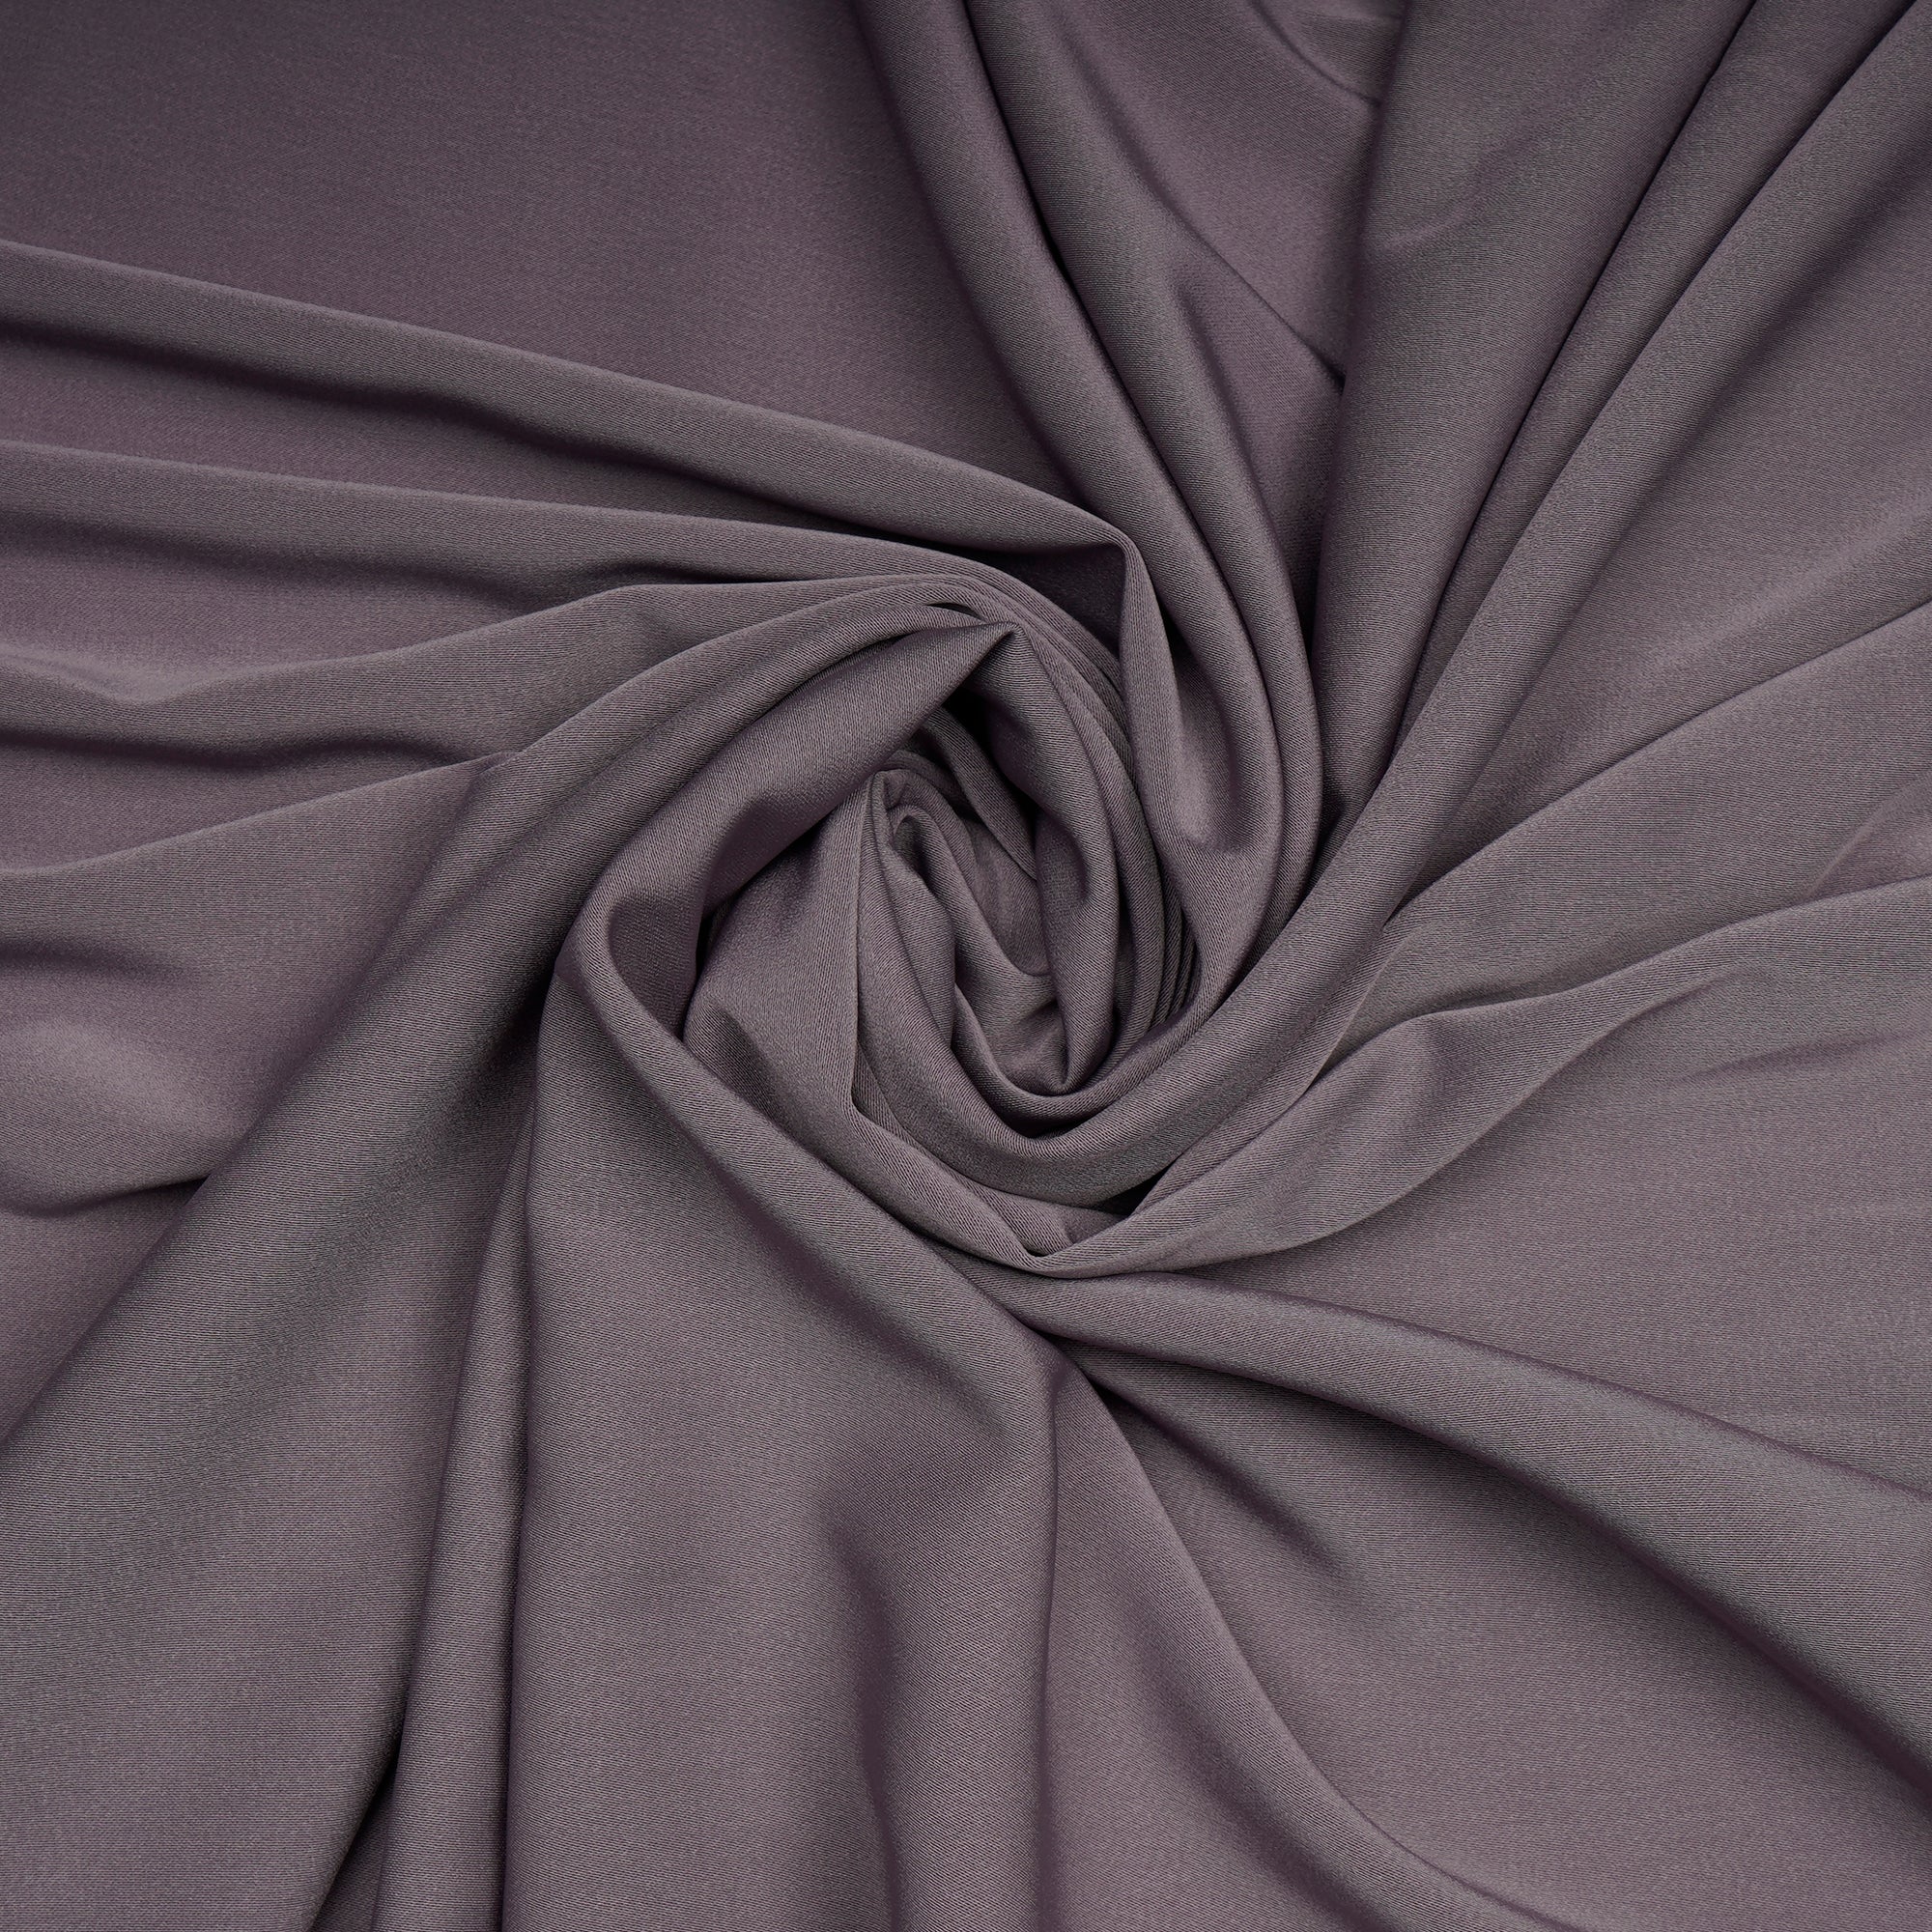 Purple Dove Solid Dyed Imported Prada Crepe Fabric (60" Width)